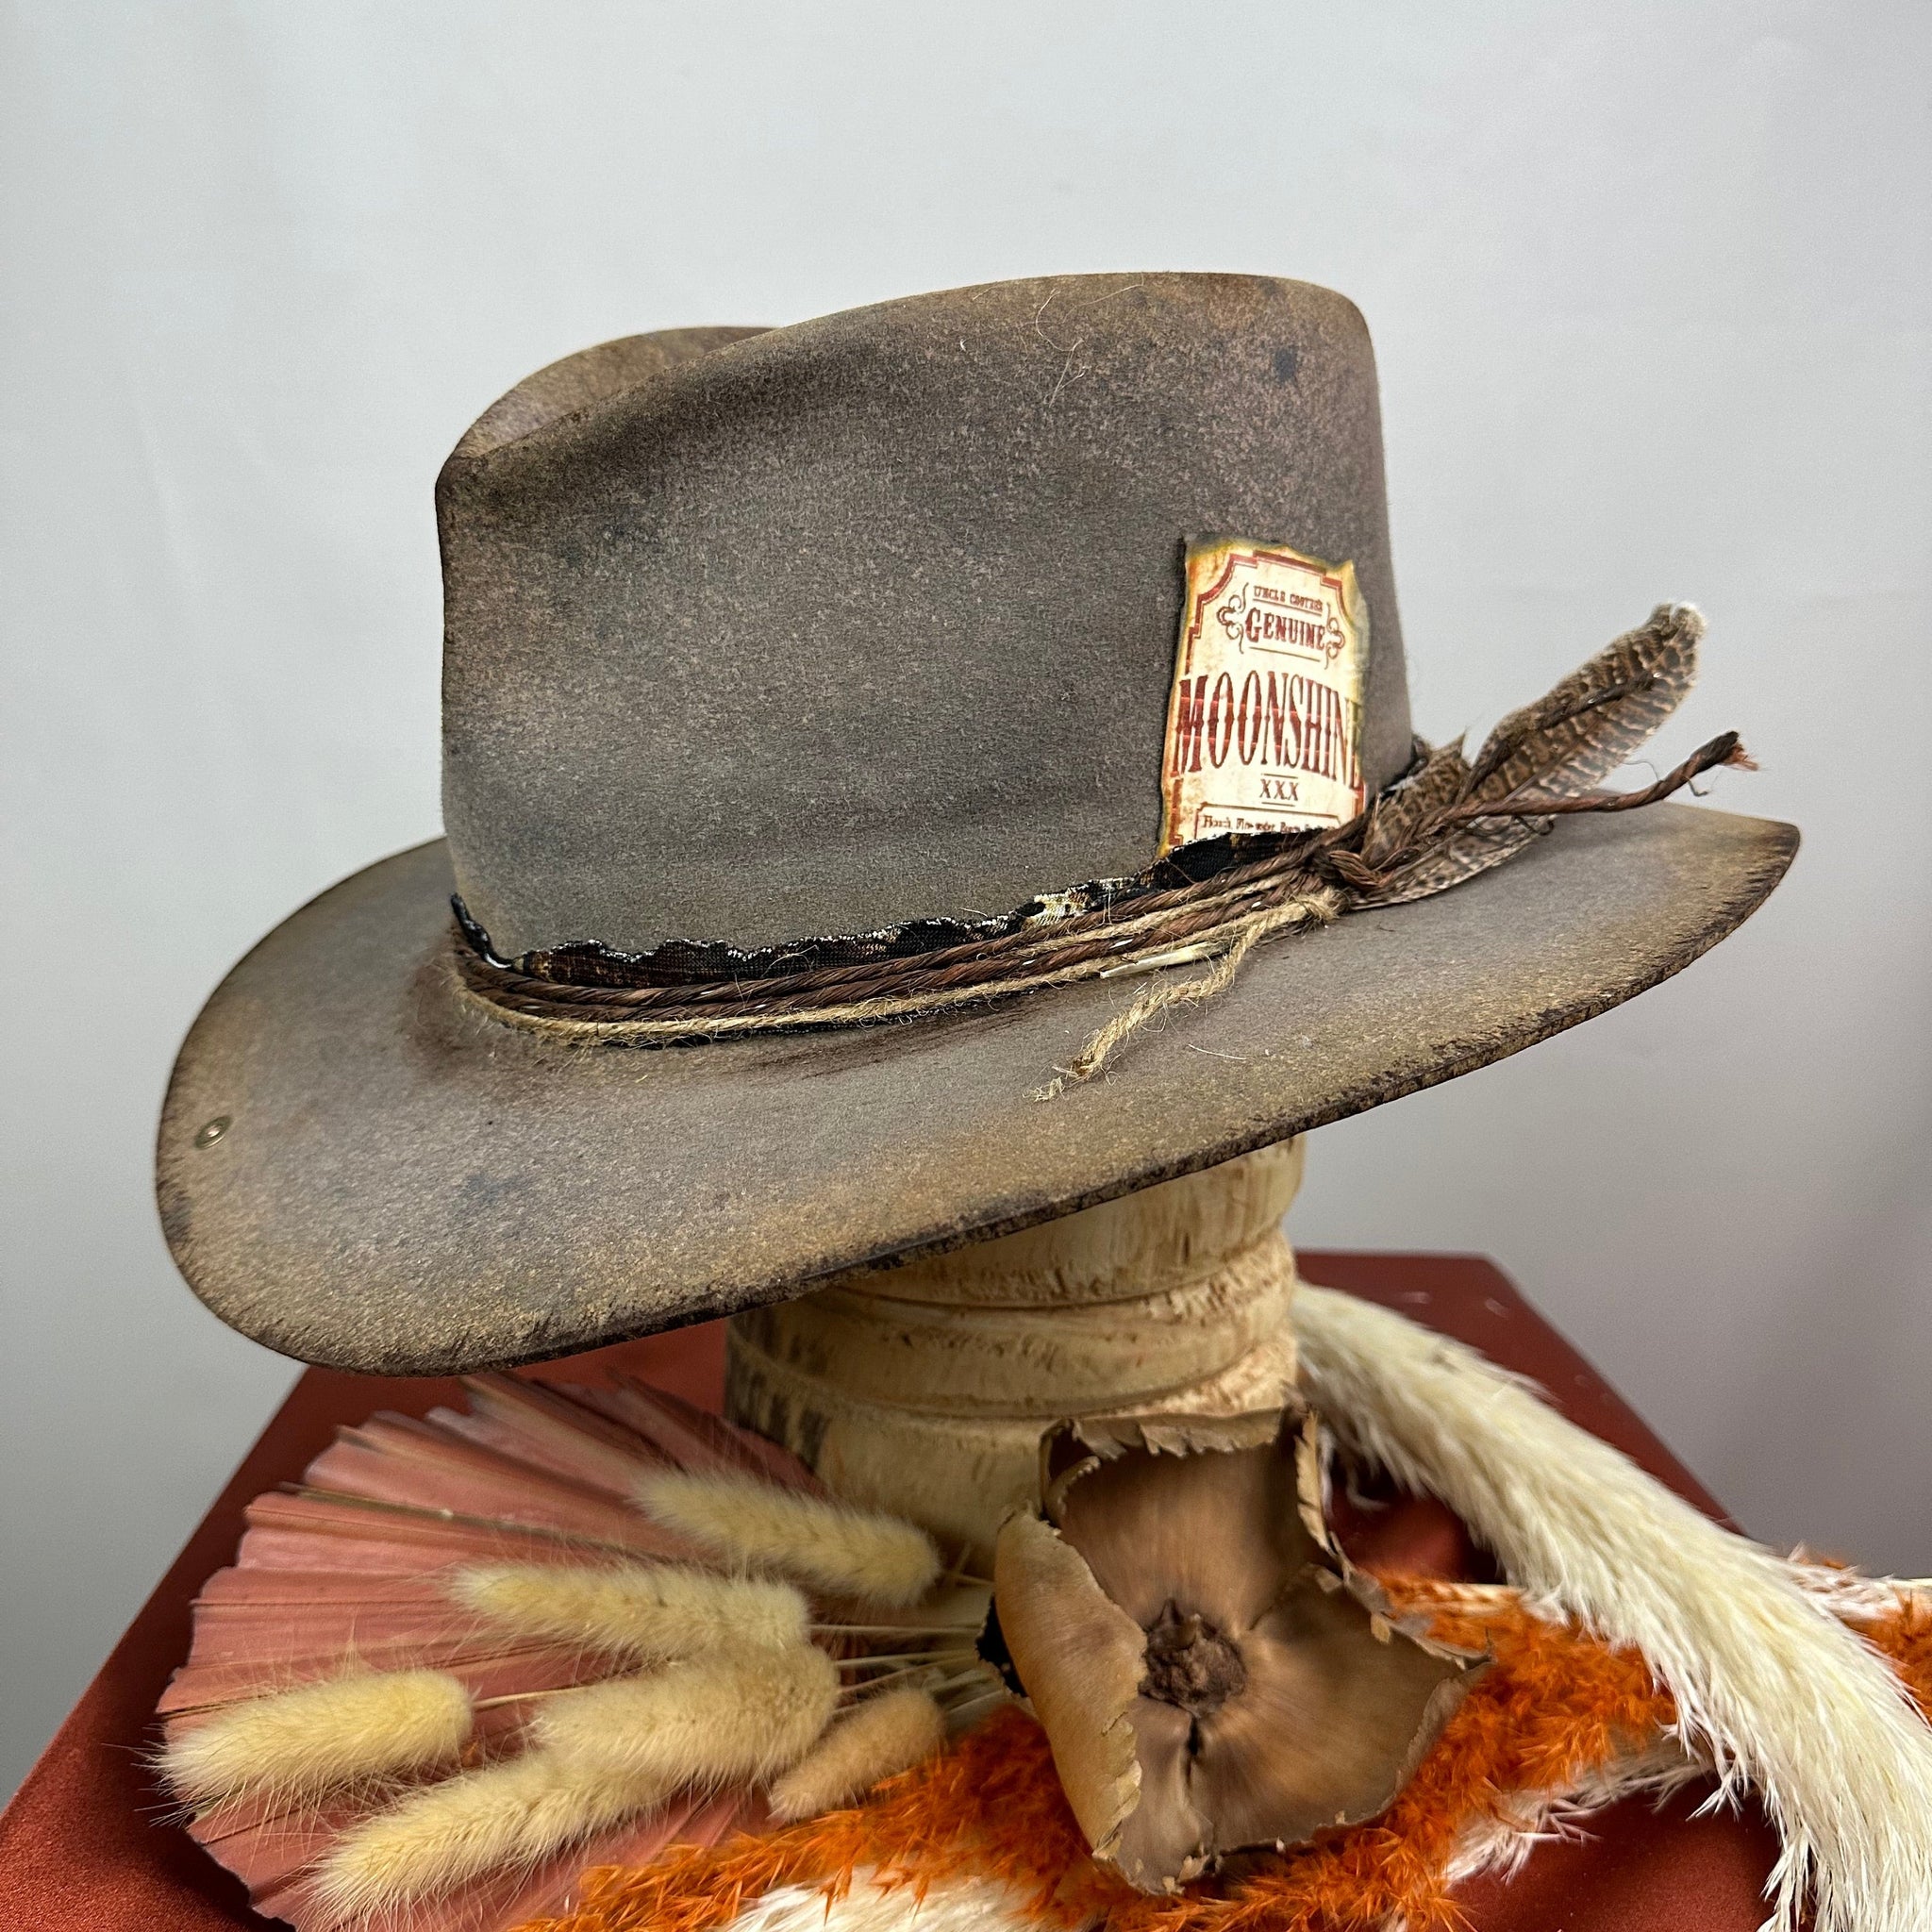 The Moonshiner Brown and Black Distressed Cowboy Hat